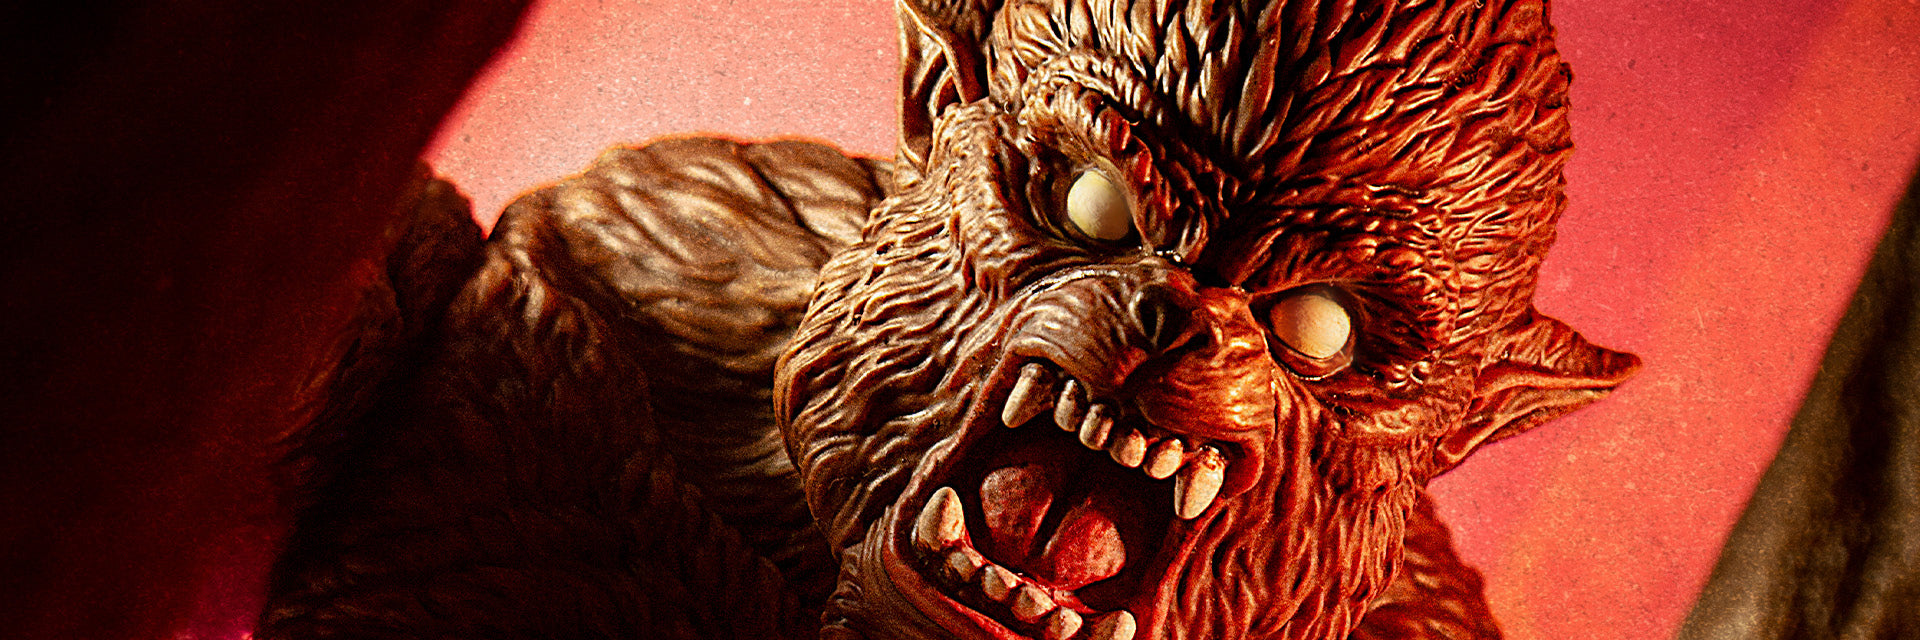 Marvel's WEREWOLF BY NIGHT IN COLOR Special Scares Up First